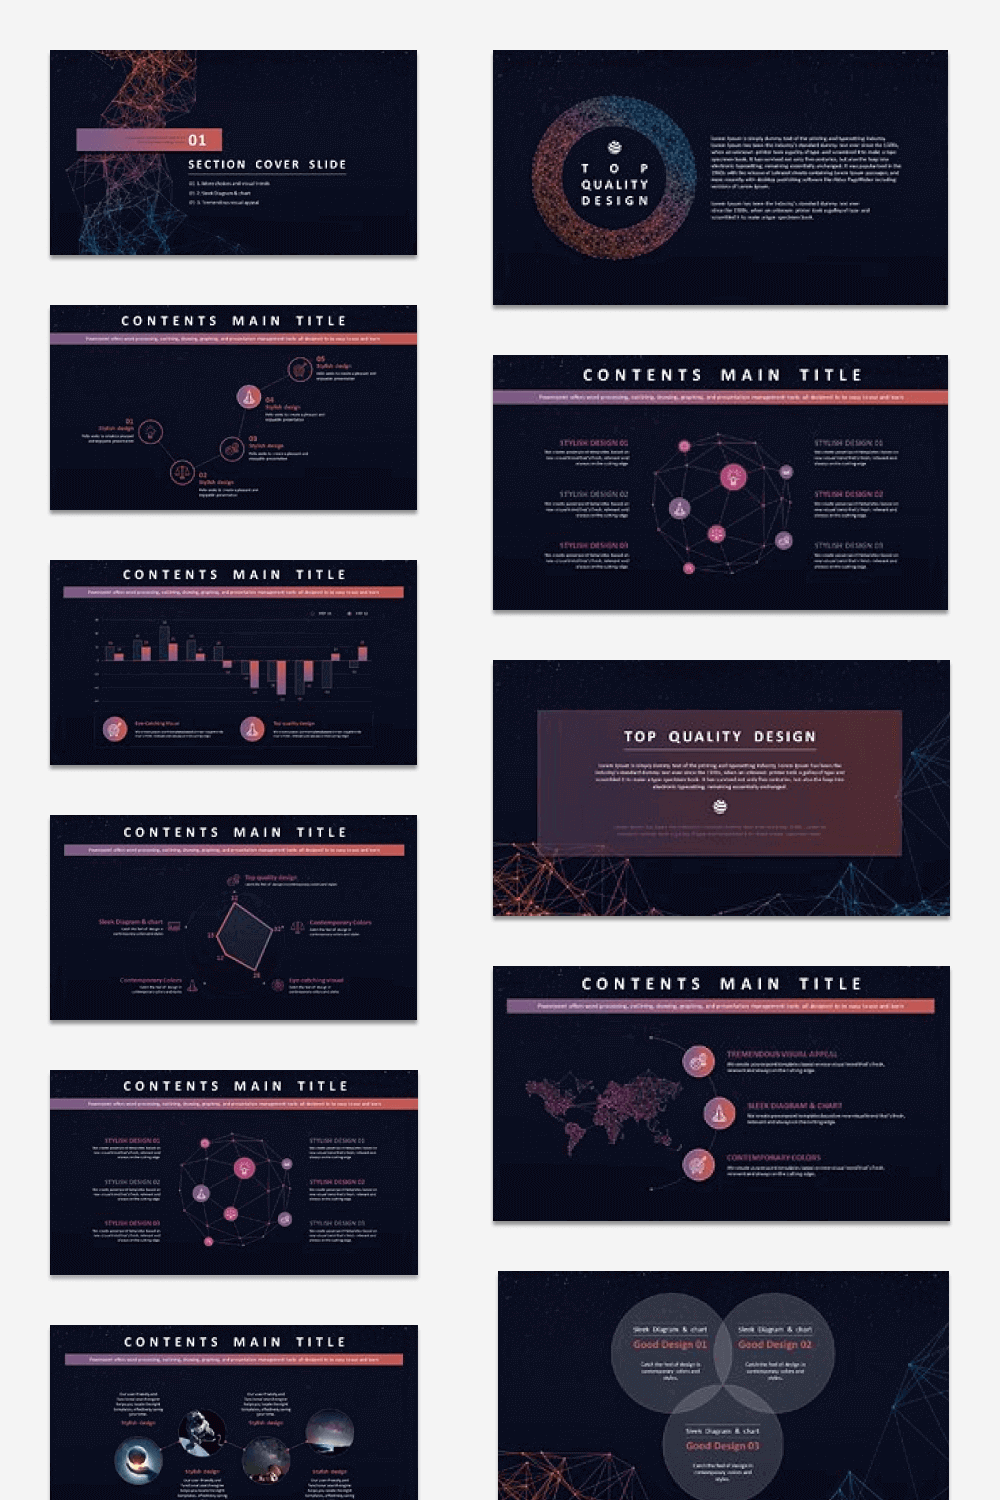 Good Design of Space PPT Template.